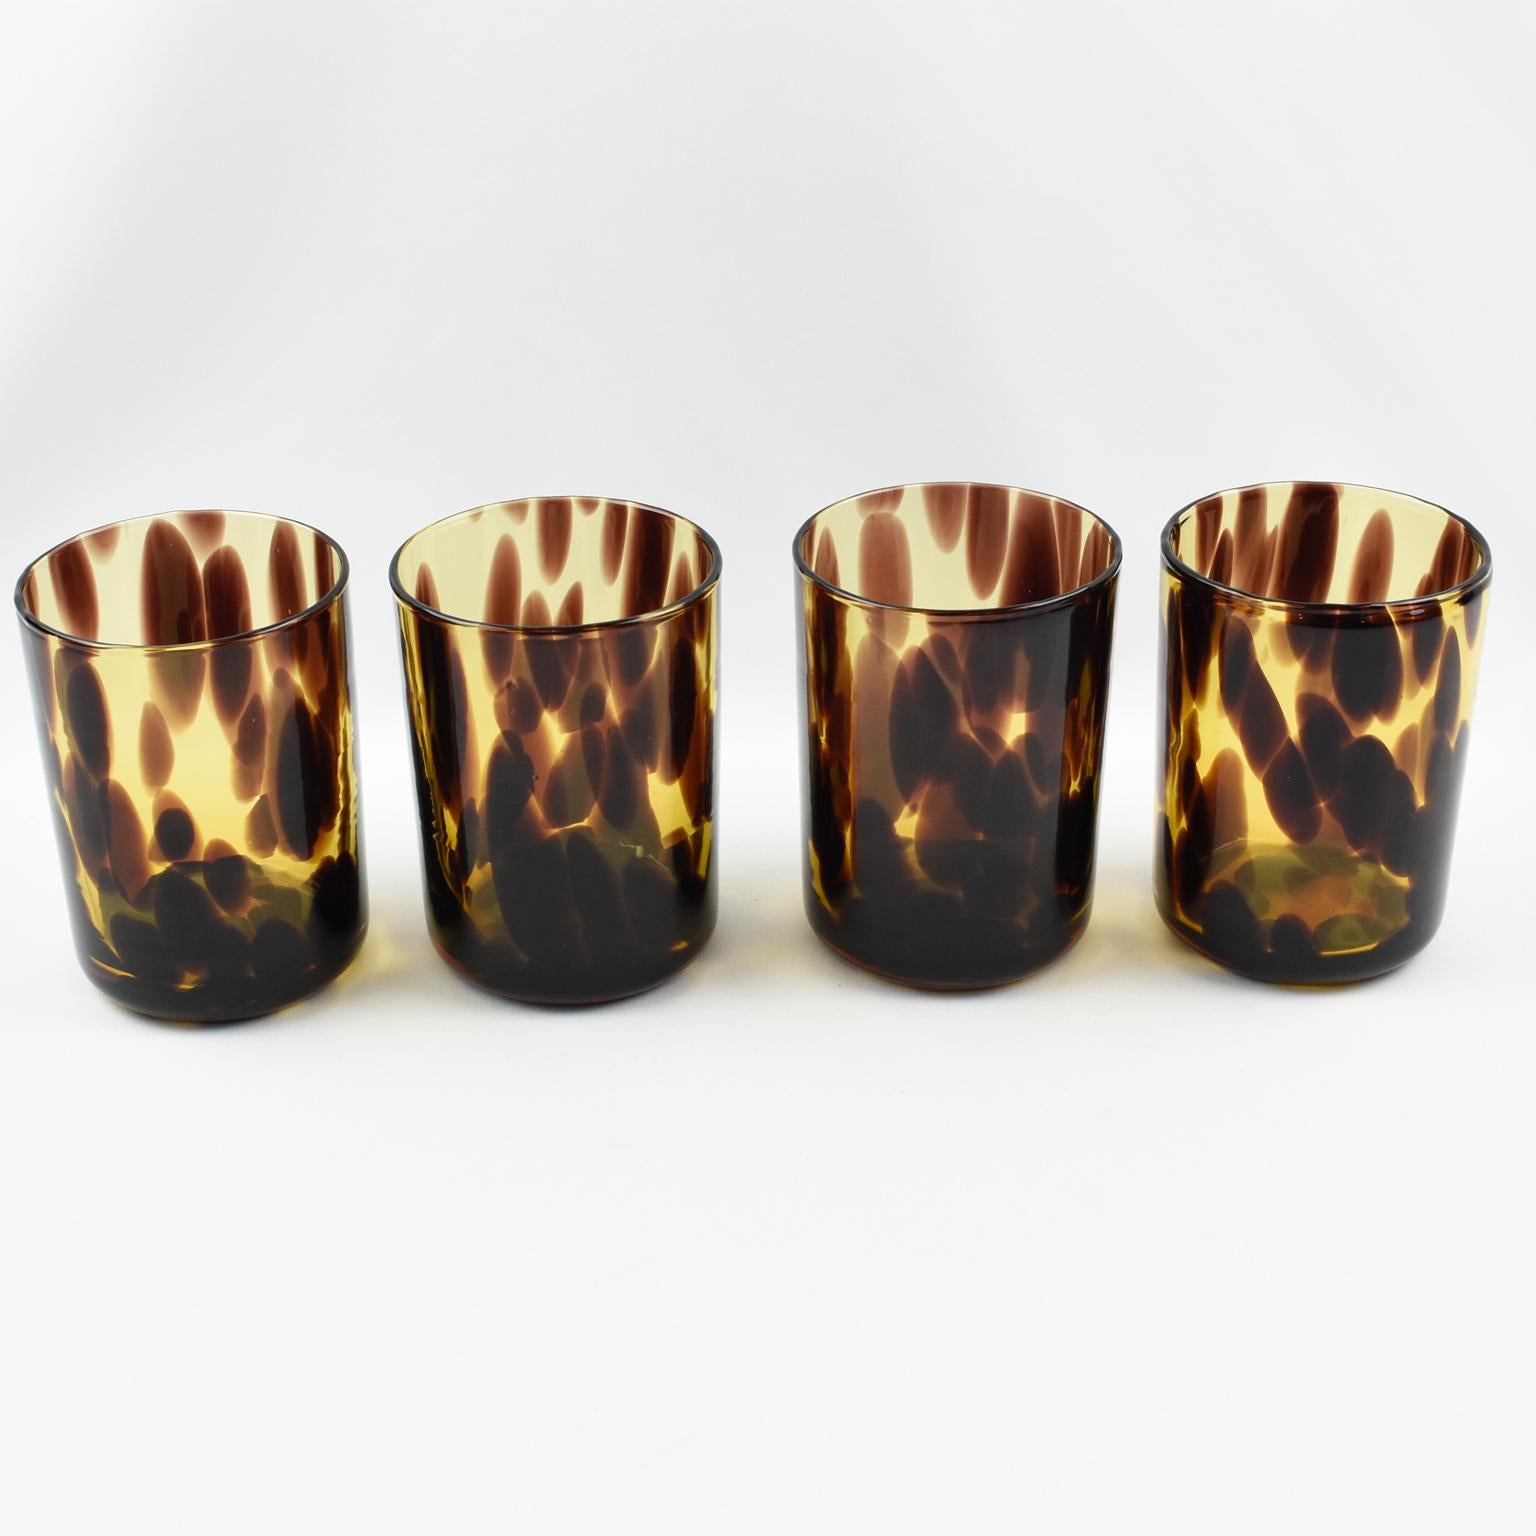 Elegant barware, bar set manufactured by Empoli, Italy for Christian Dior Home Collection. Set of four tumbler glasses. Mouth-blown with exclusive tortoiseshell color flowing pattern. 
Measurements: 3.38 in. diameter (8.5 cm) x 4.50 in. high (11.5